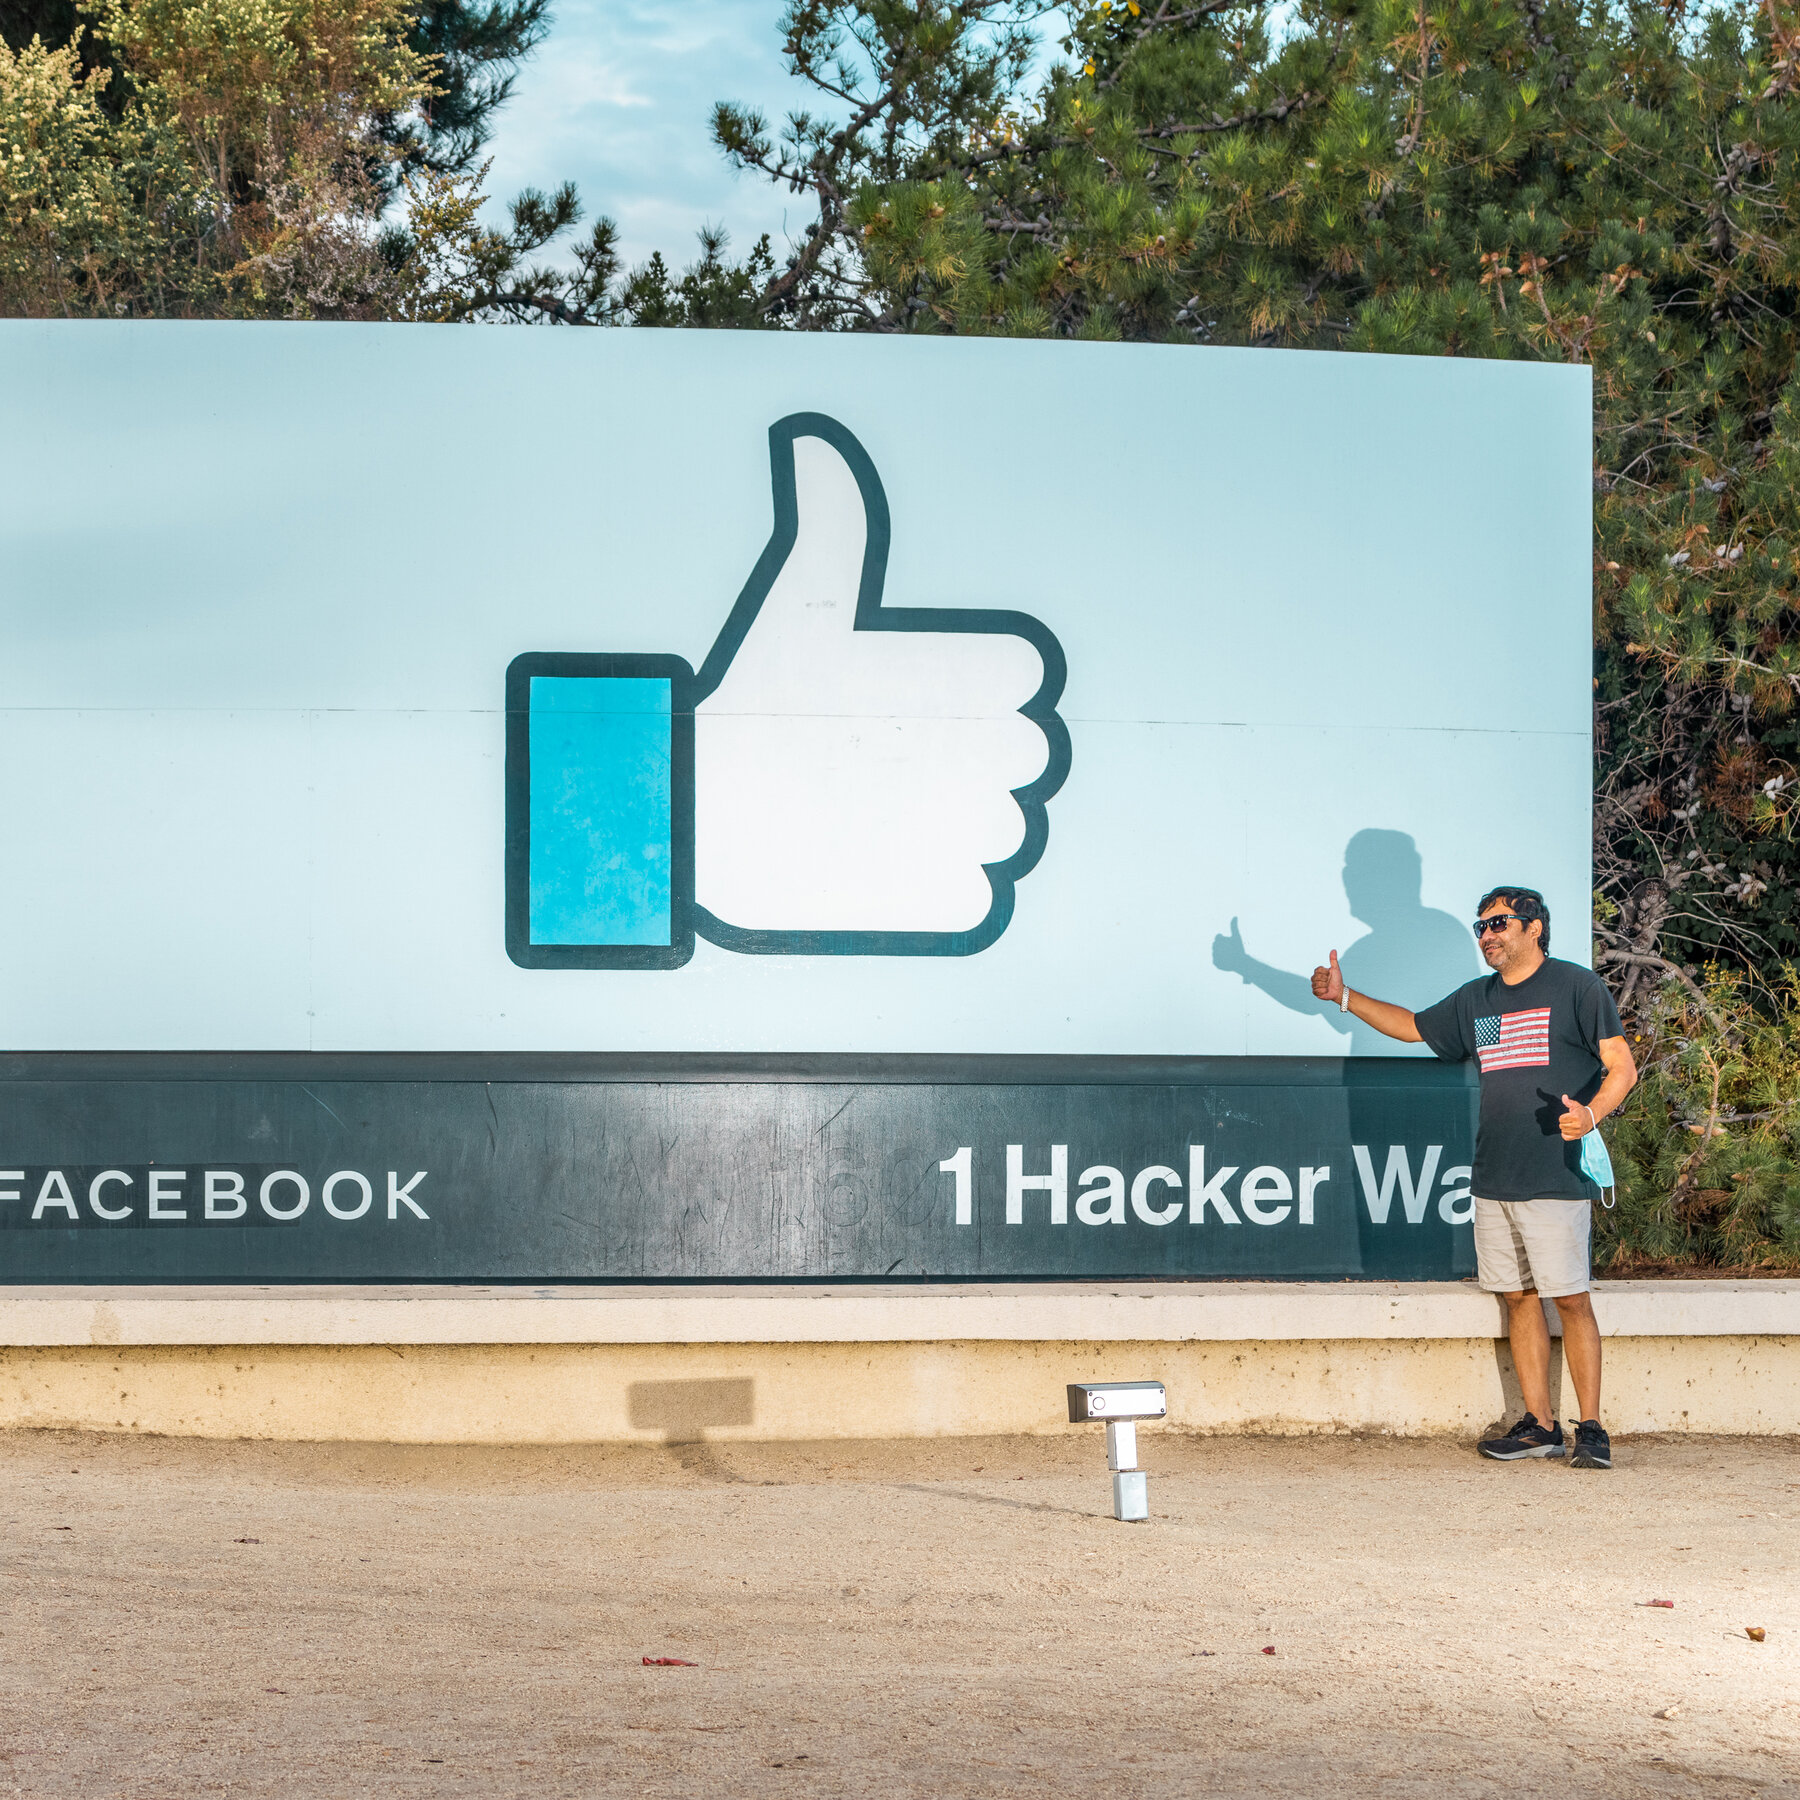 What disrupted Facebook platforms? Are you still wondering? Here's the full story